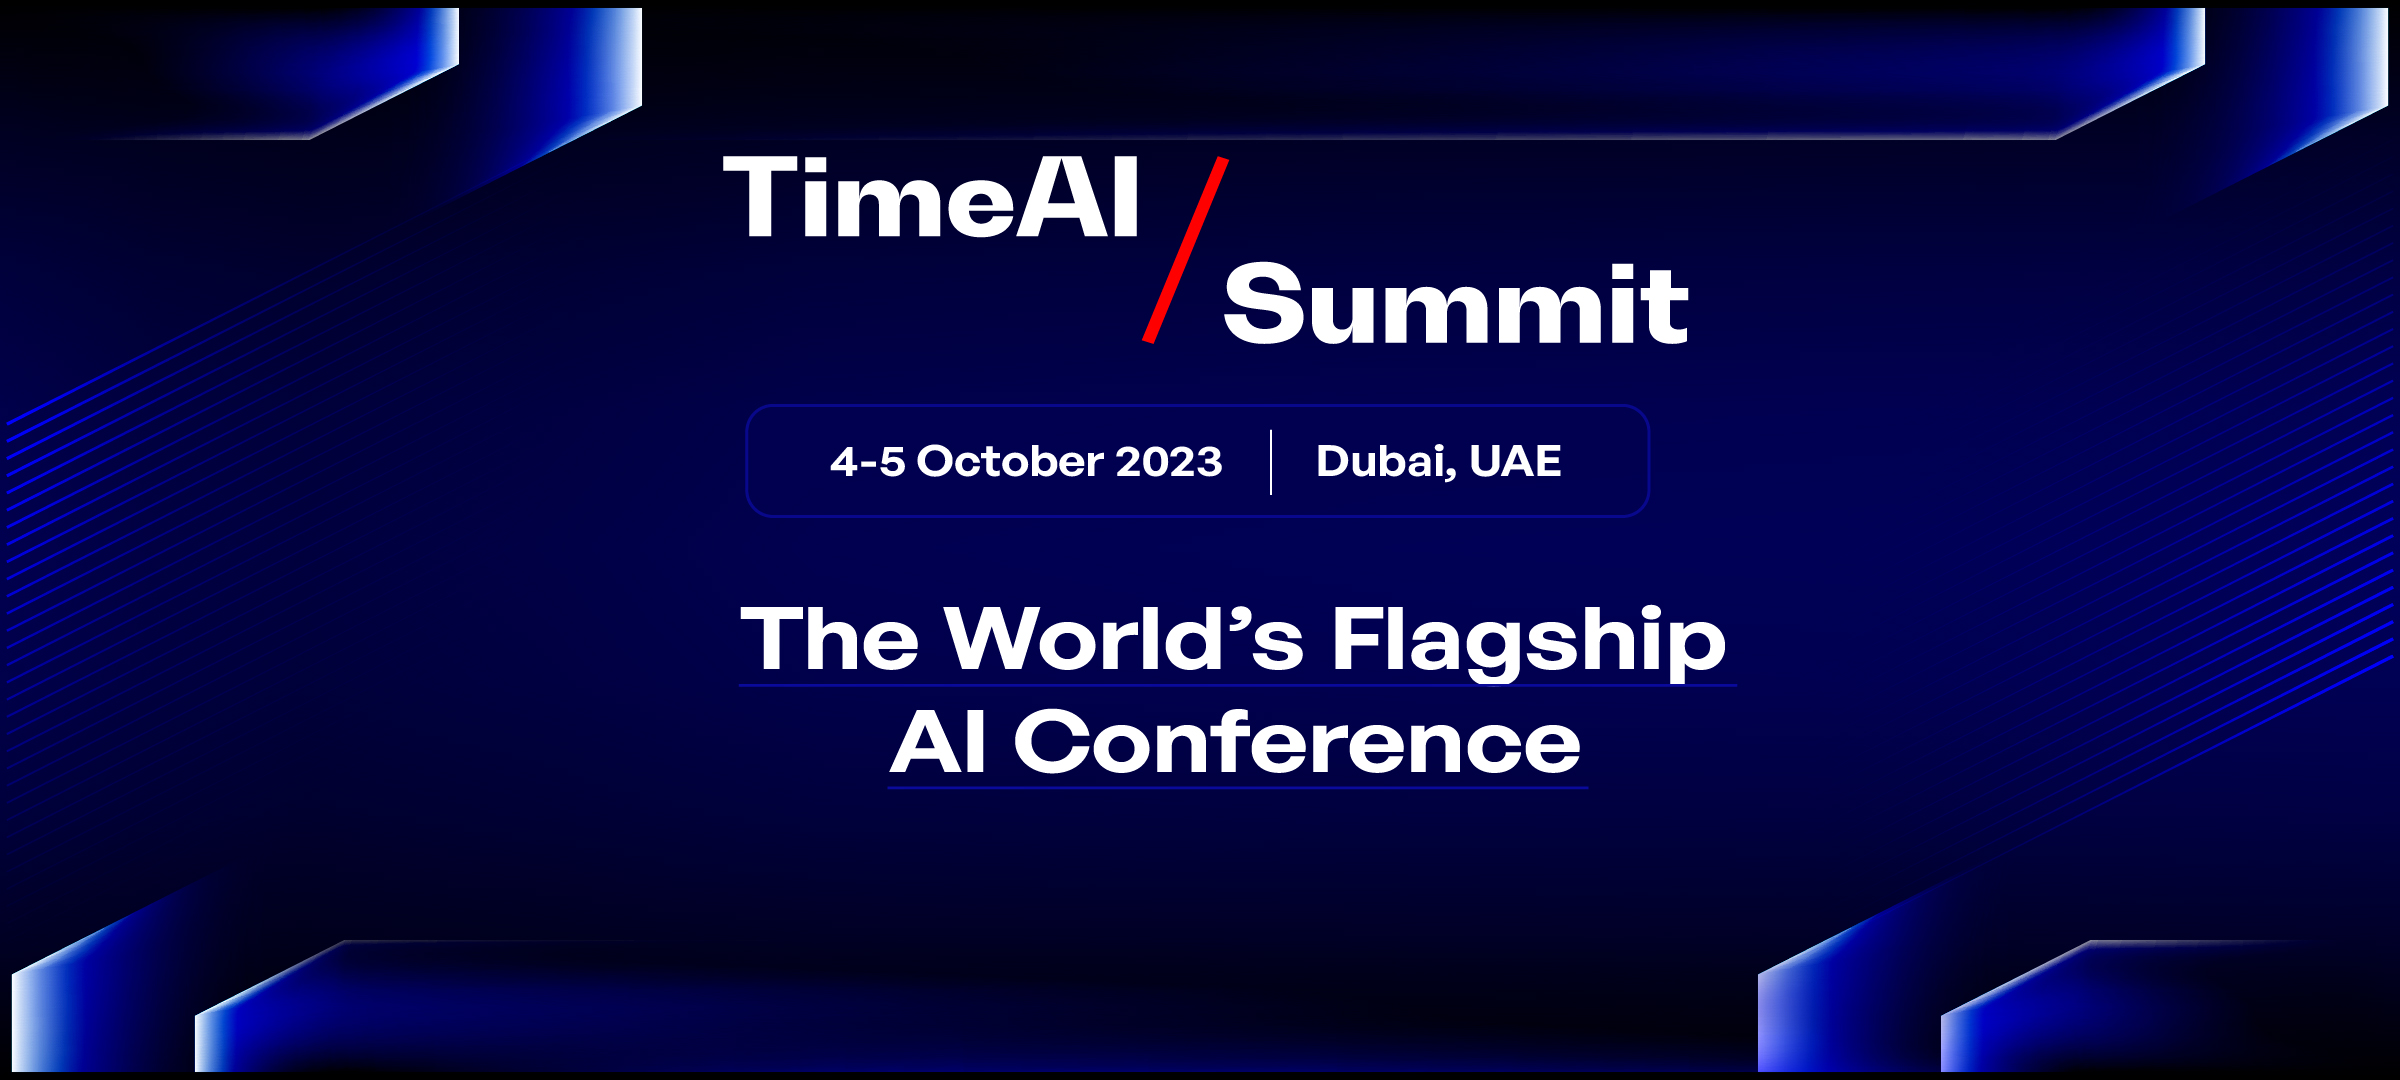 TimeAI Summit is Bringing Together Tech Innovators and Visionaries in Dubai to Shape the Future of AI